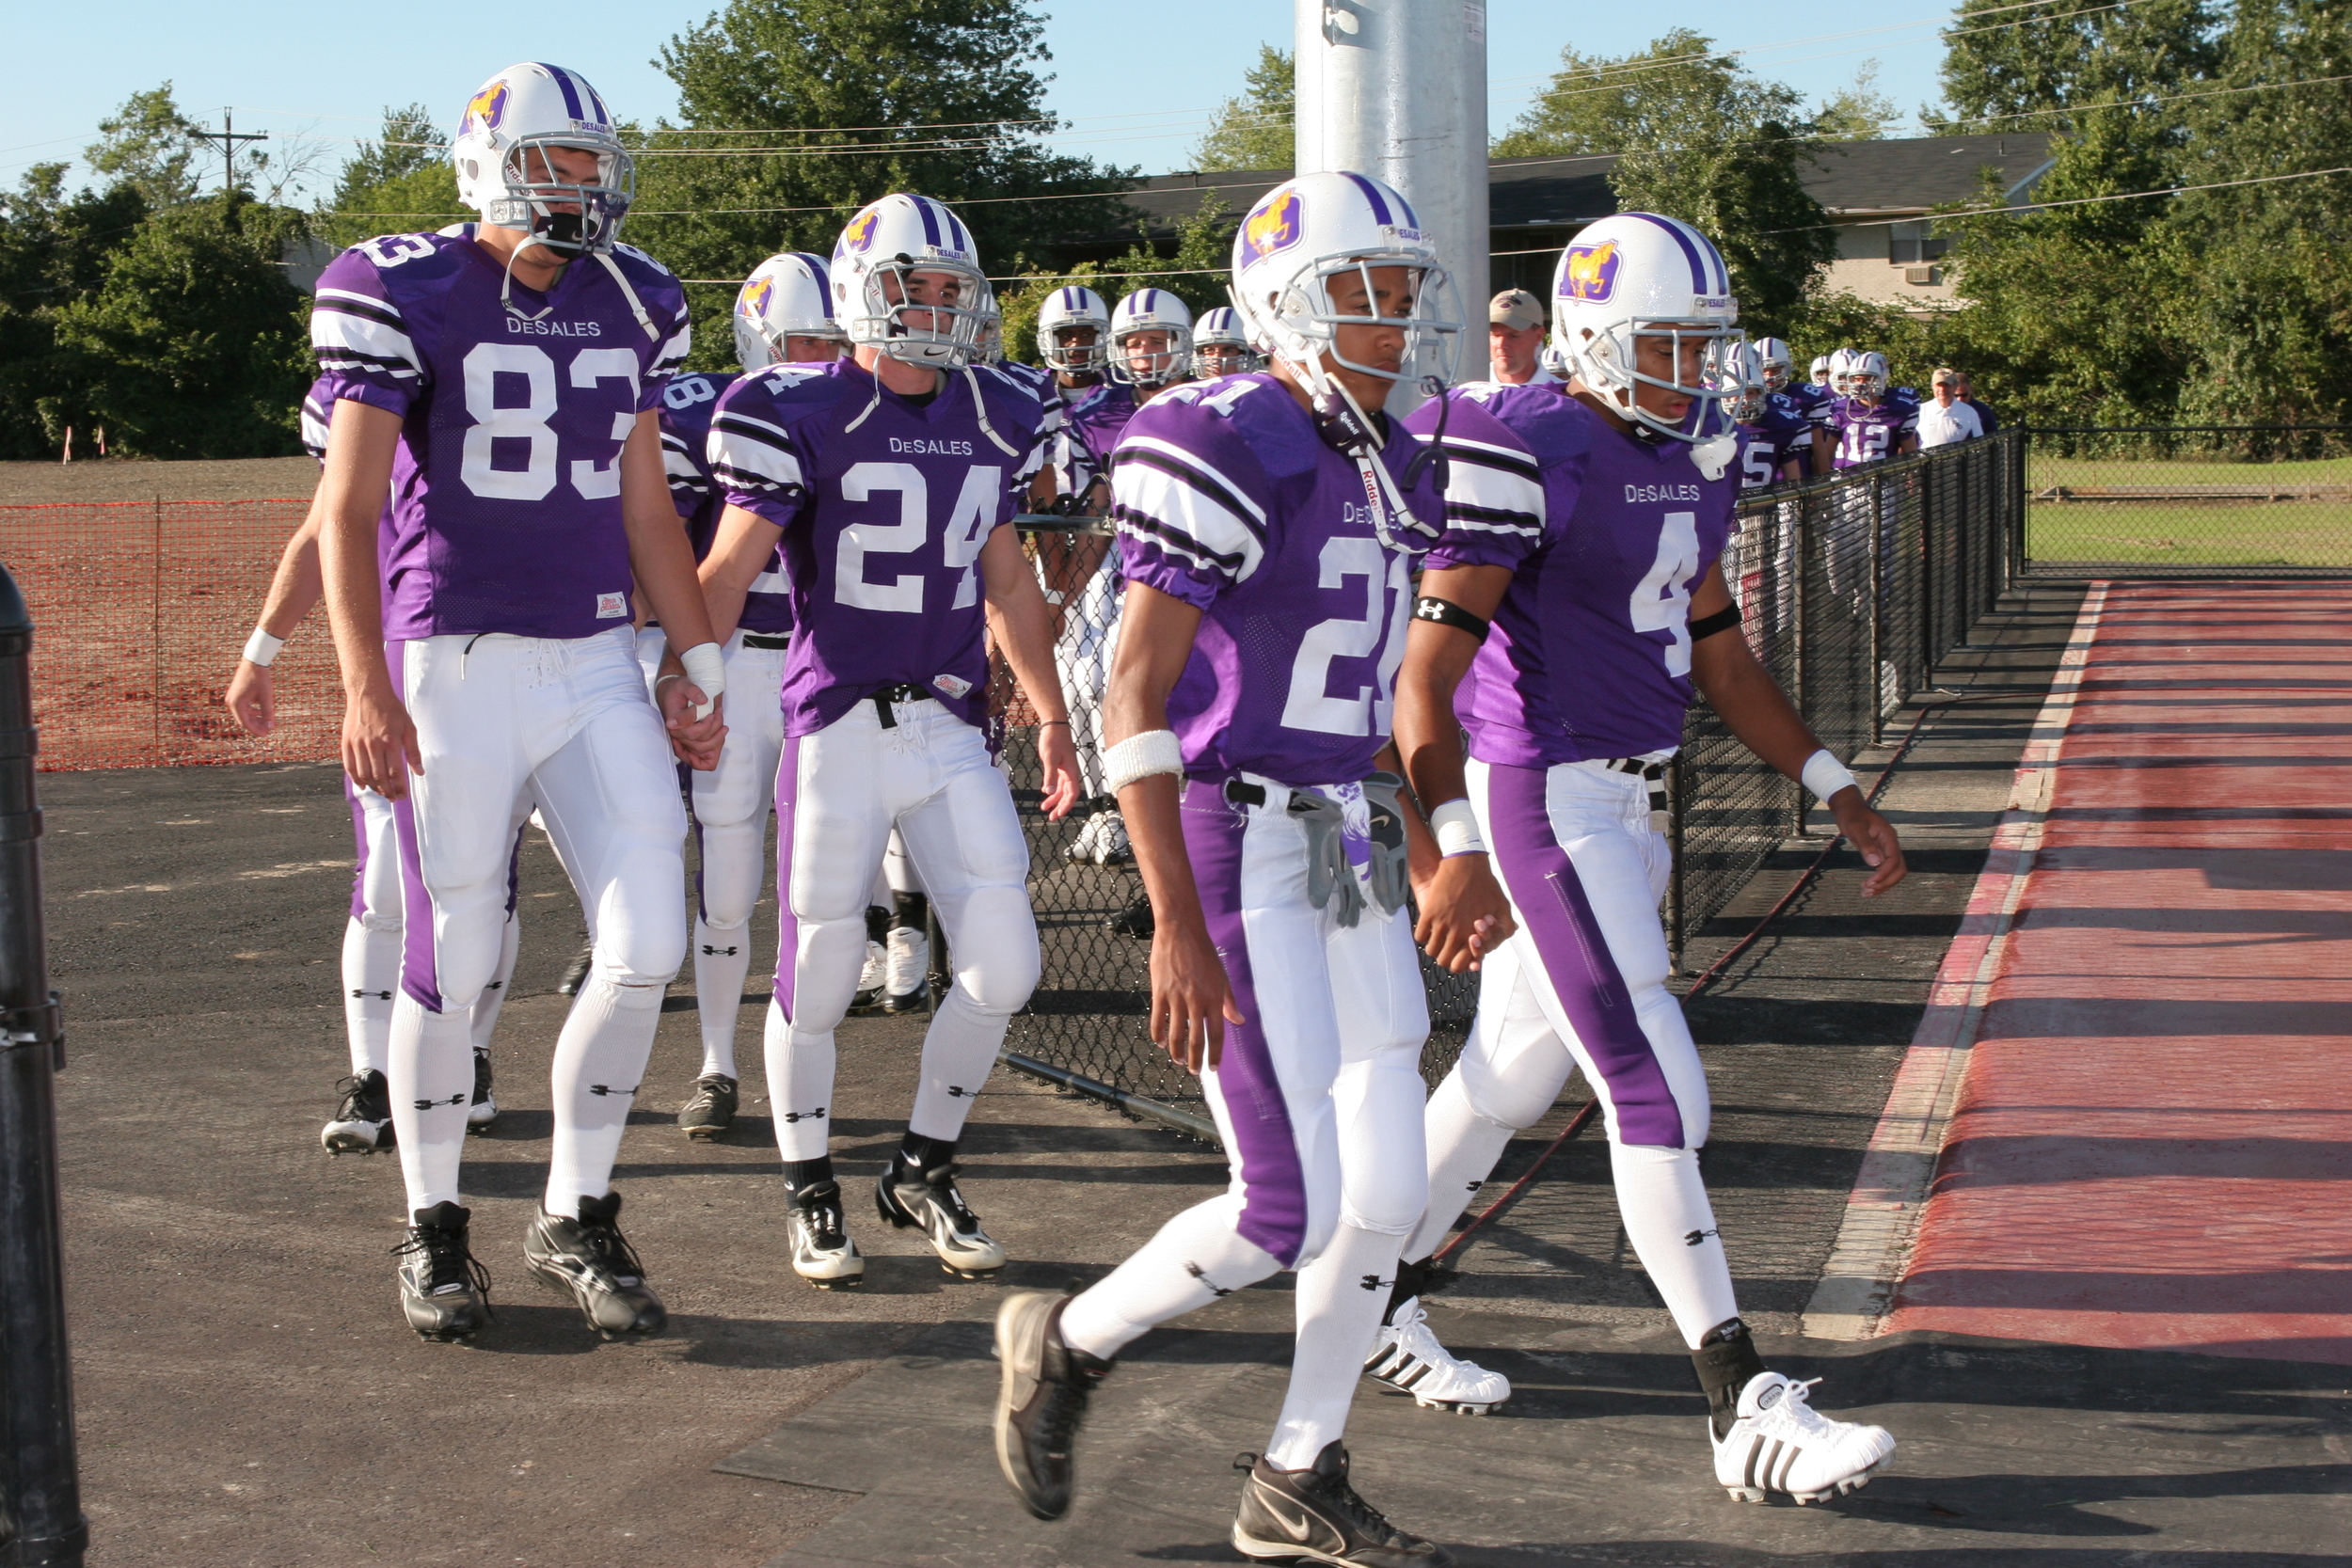 The Stallions take the field before their first game in the renovated Alumni Stadium